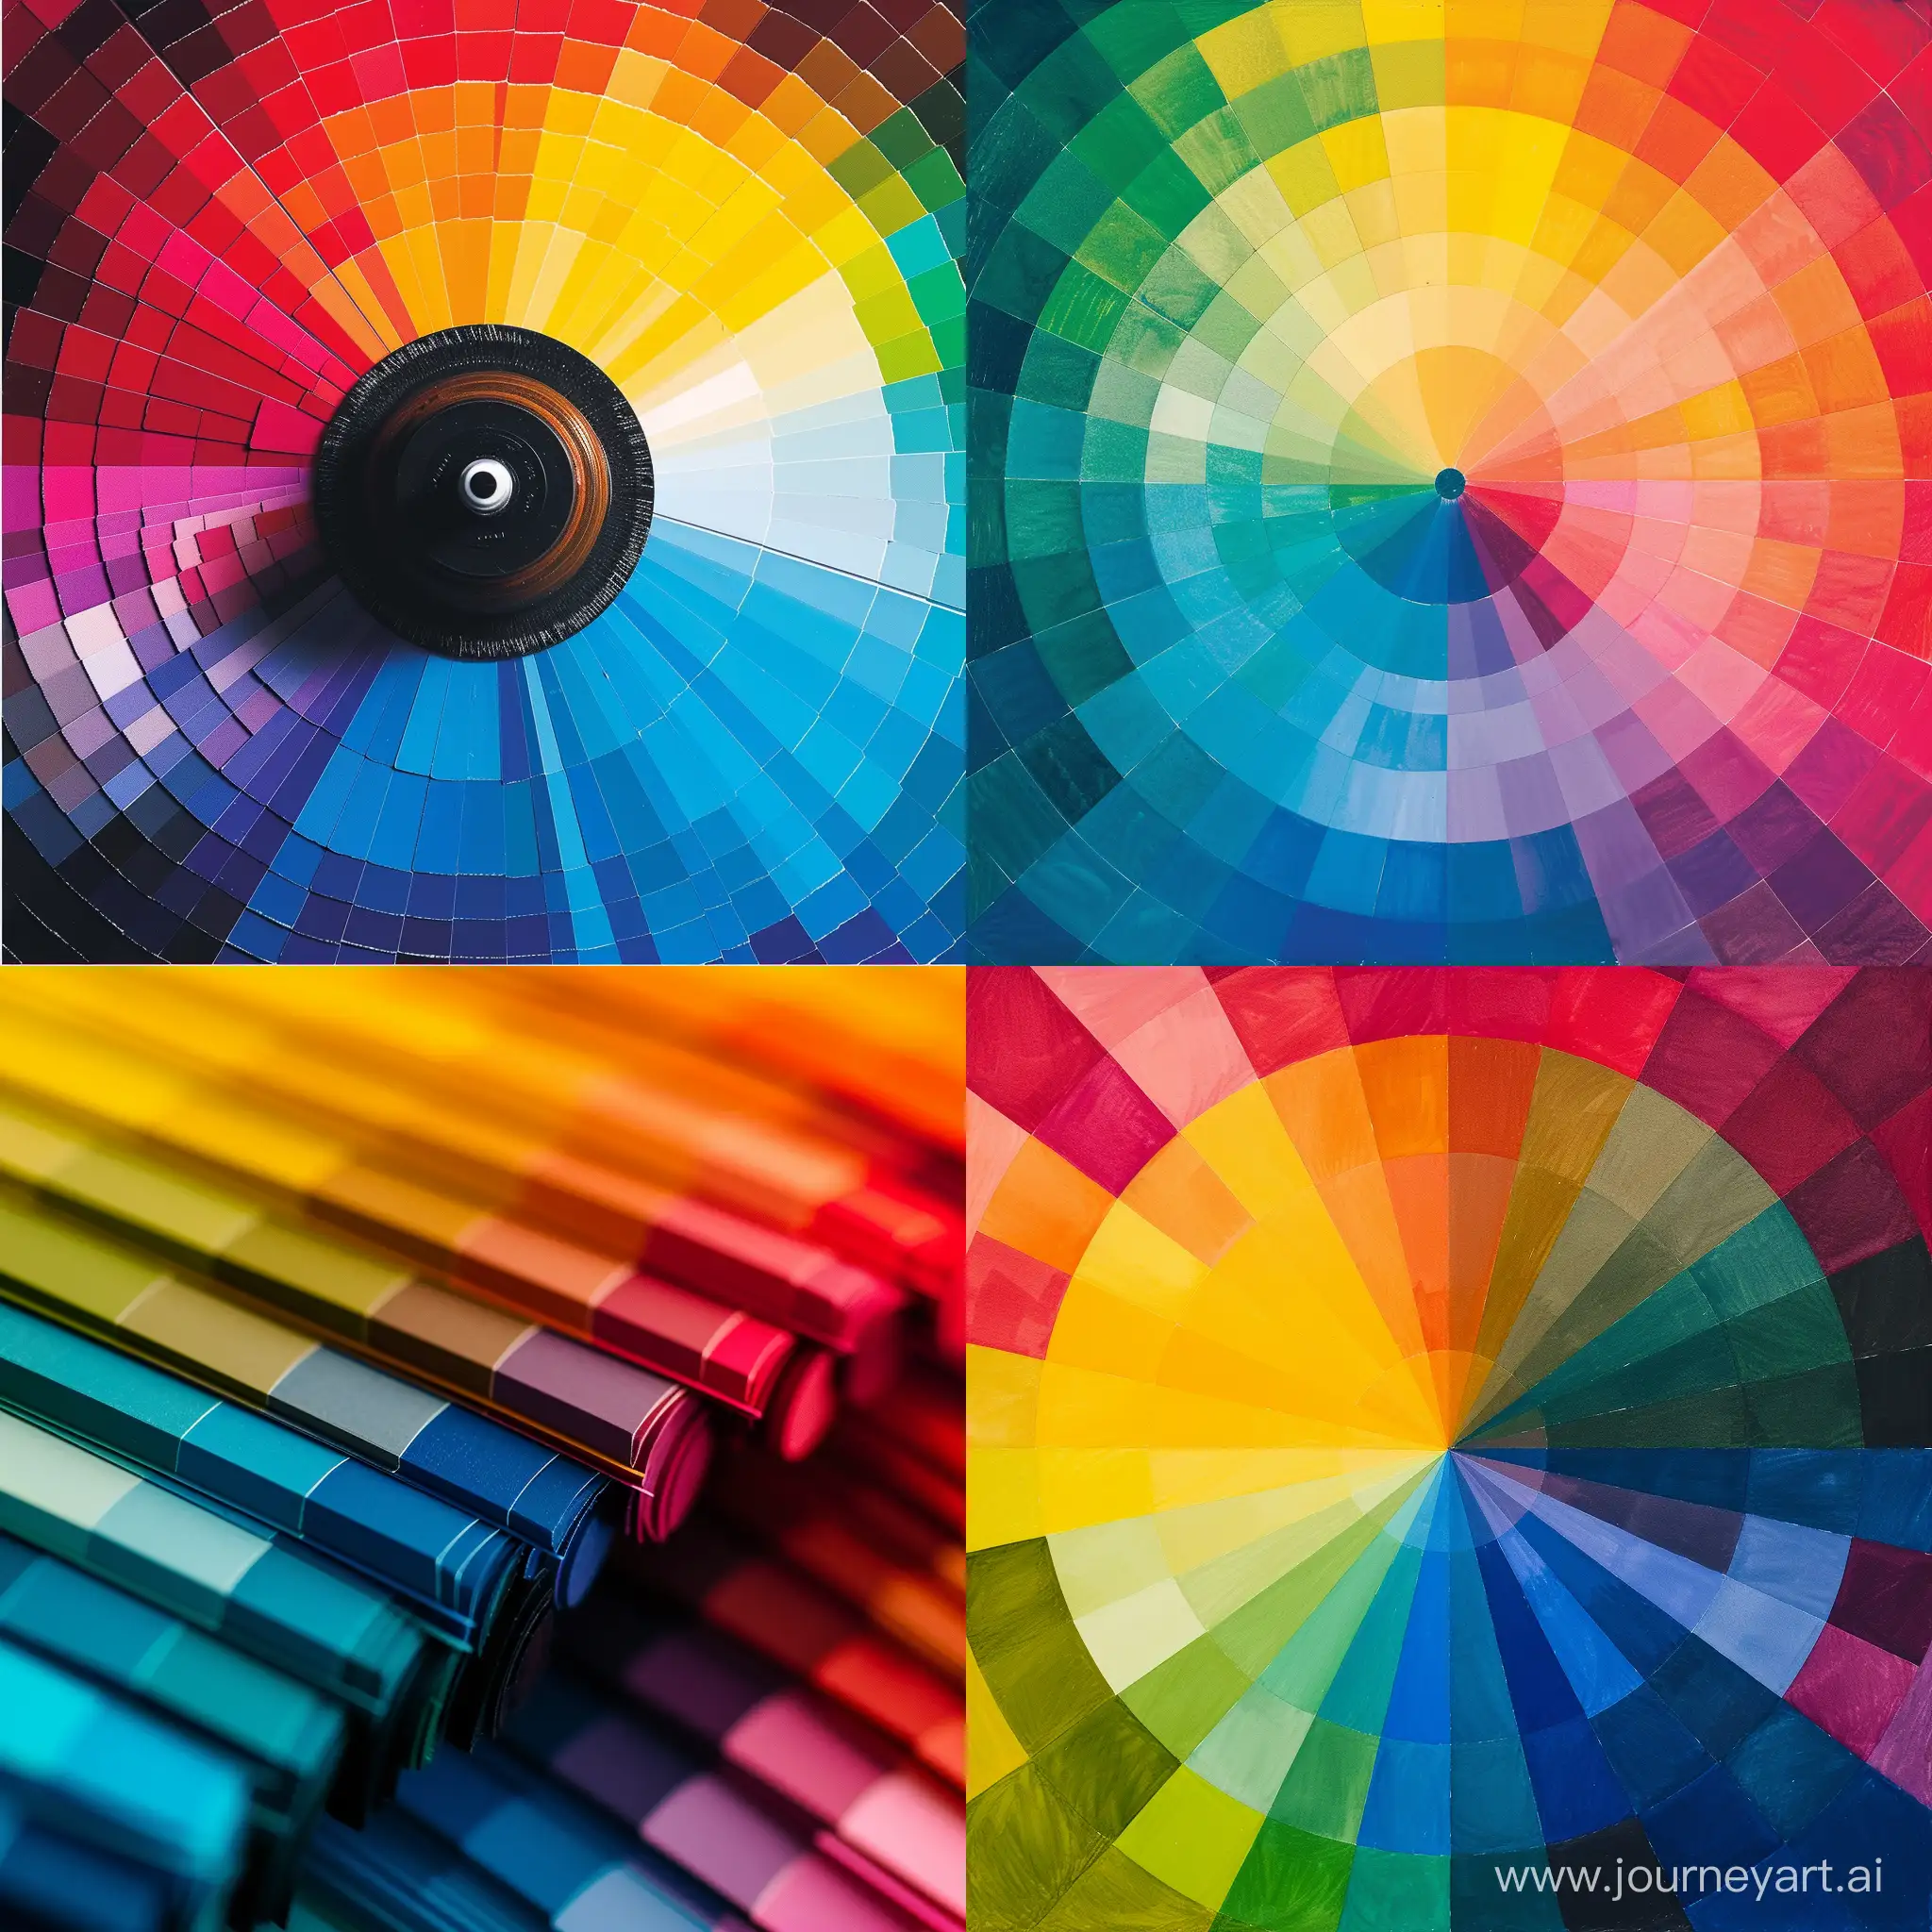 Exploring-Color-Theory-A-Visual-Guide-with-6-Variations-in-a-11-Aspect-Ratio-Image-1765